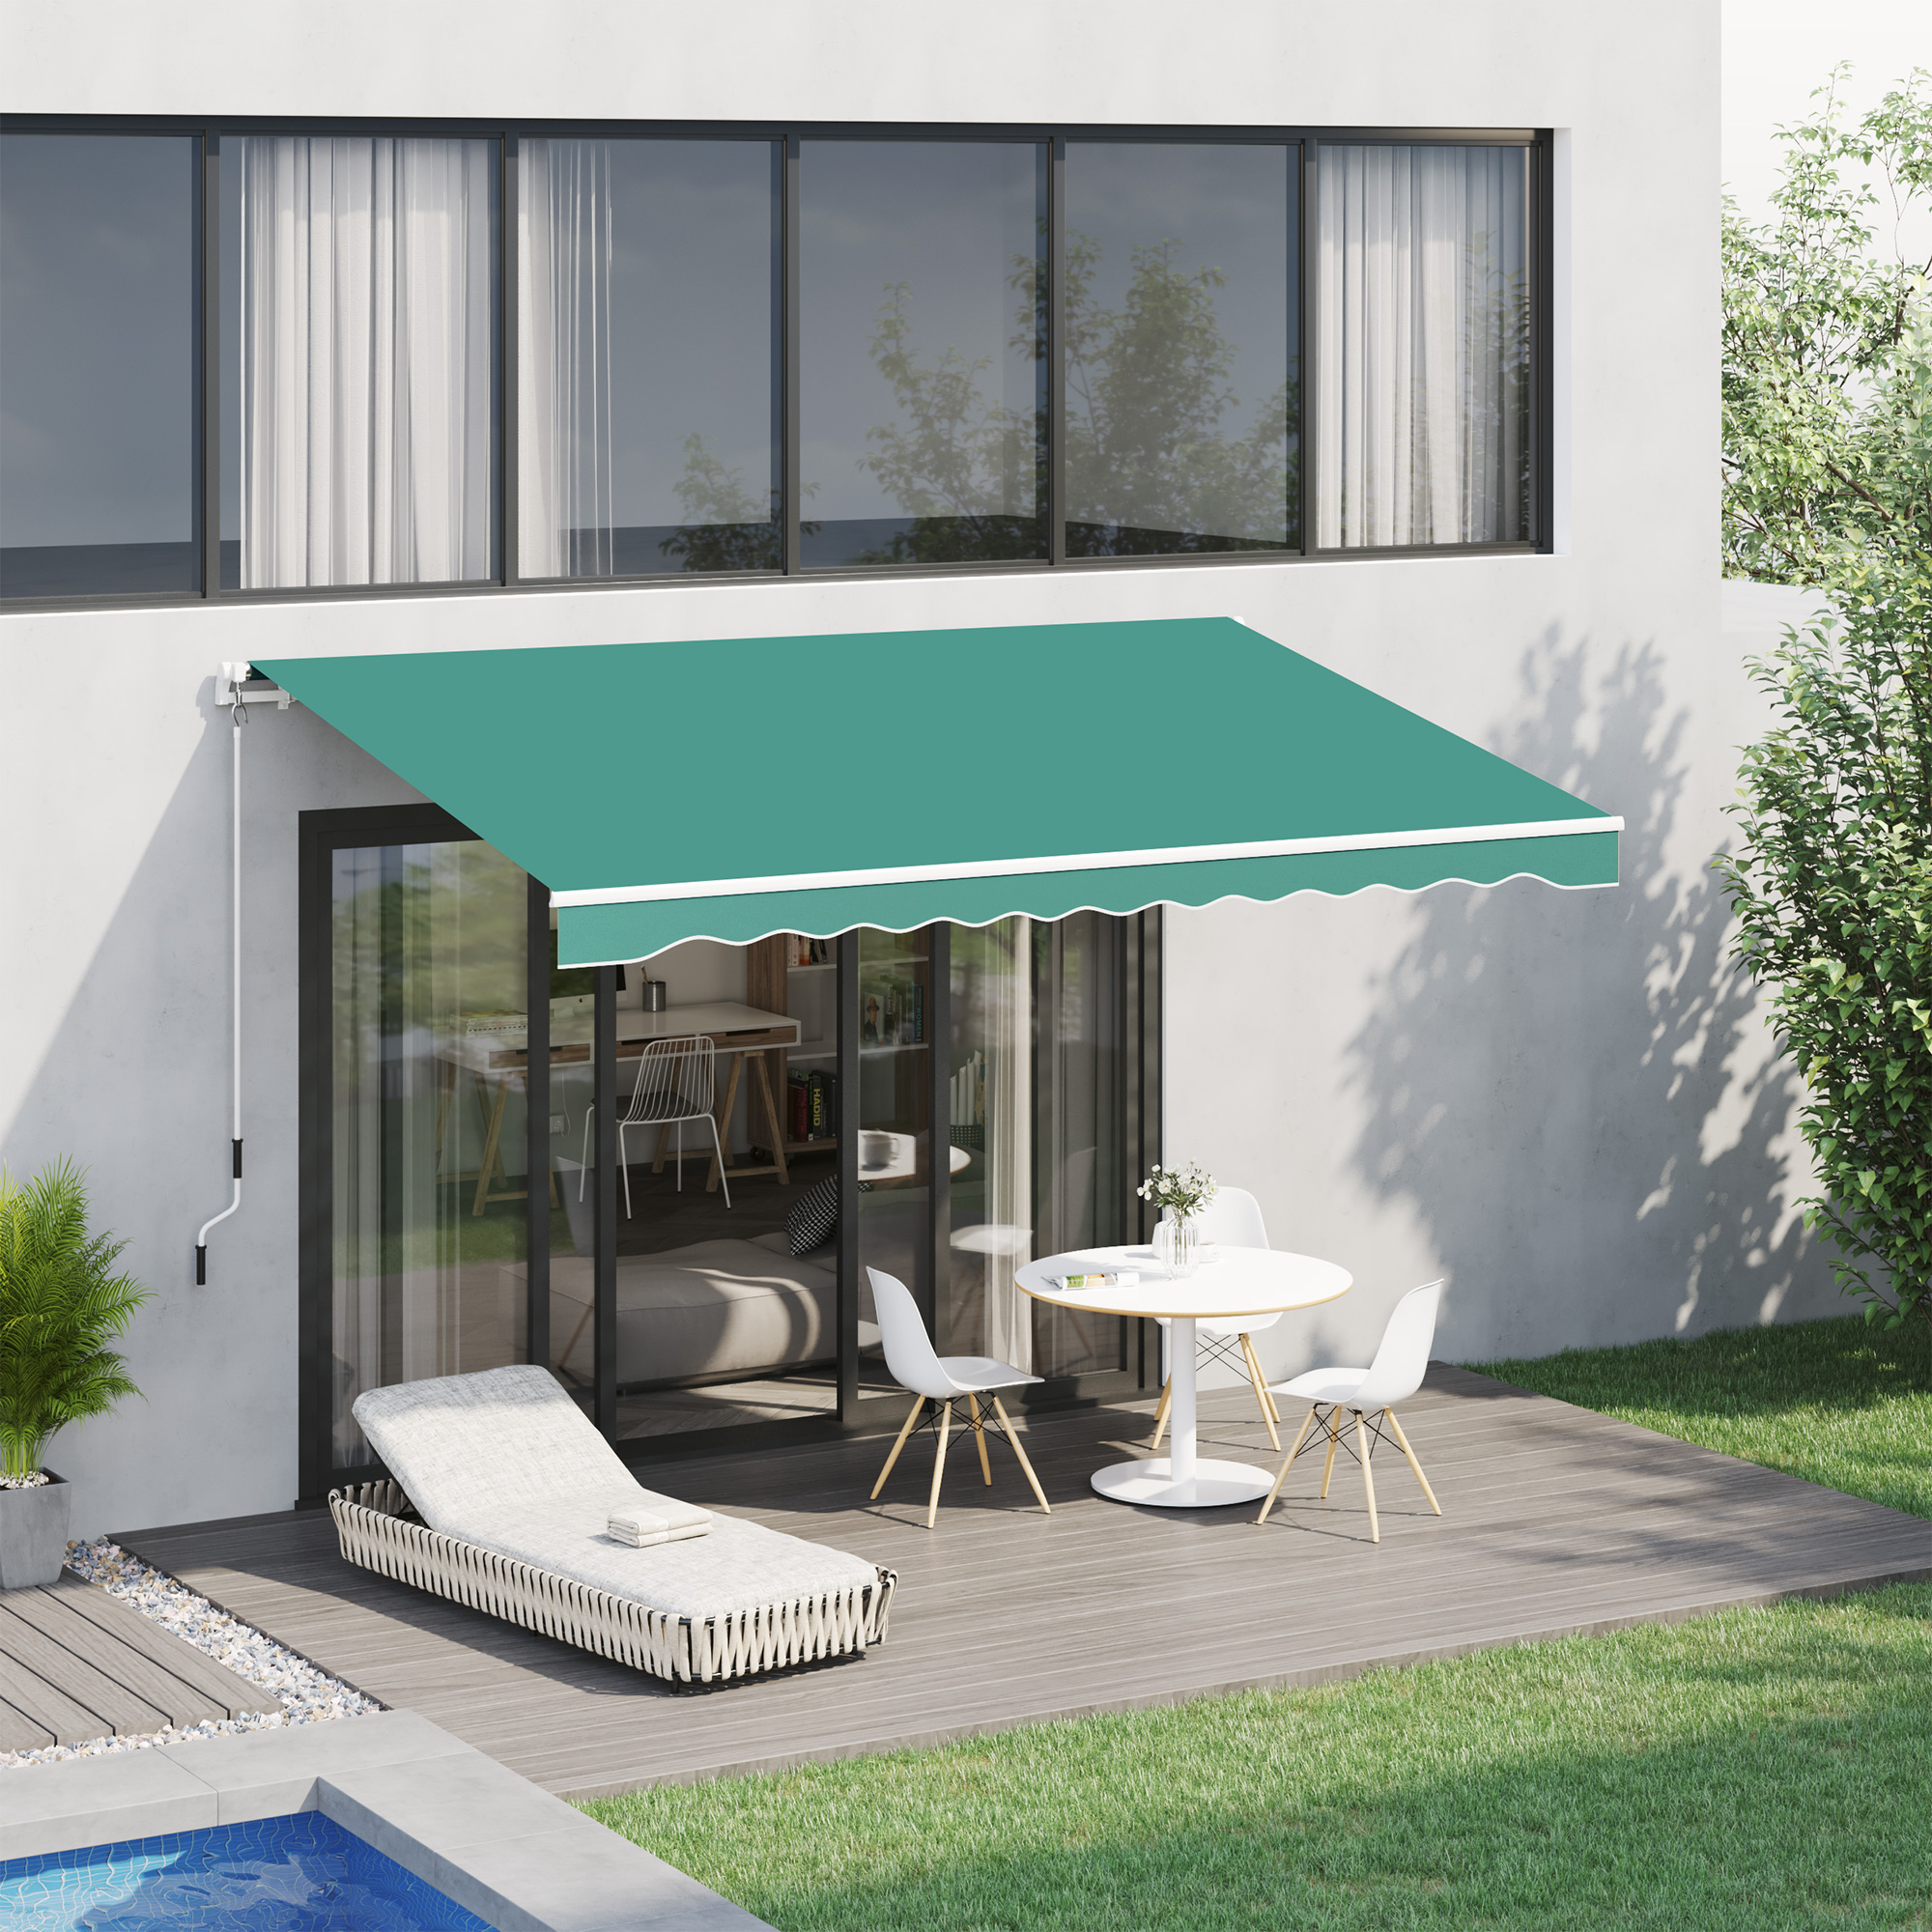 Outsunny 13' x 8' Green Manually Retractable Patio Awning - image 2 of 9